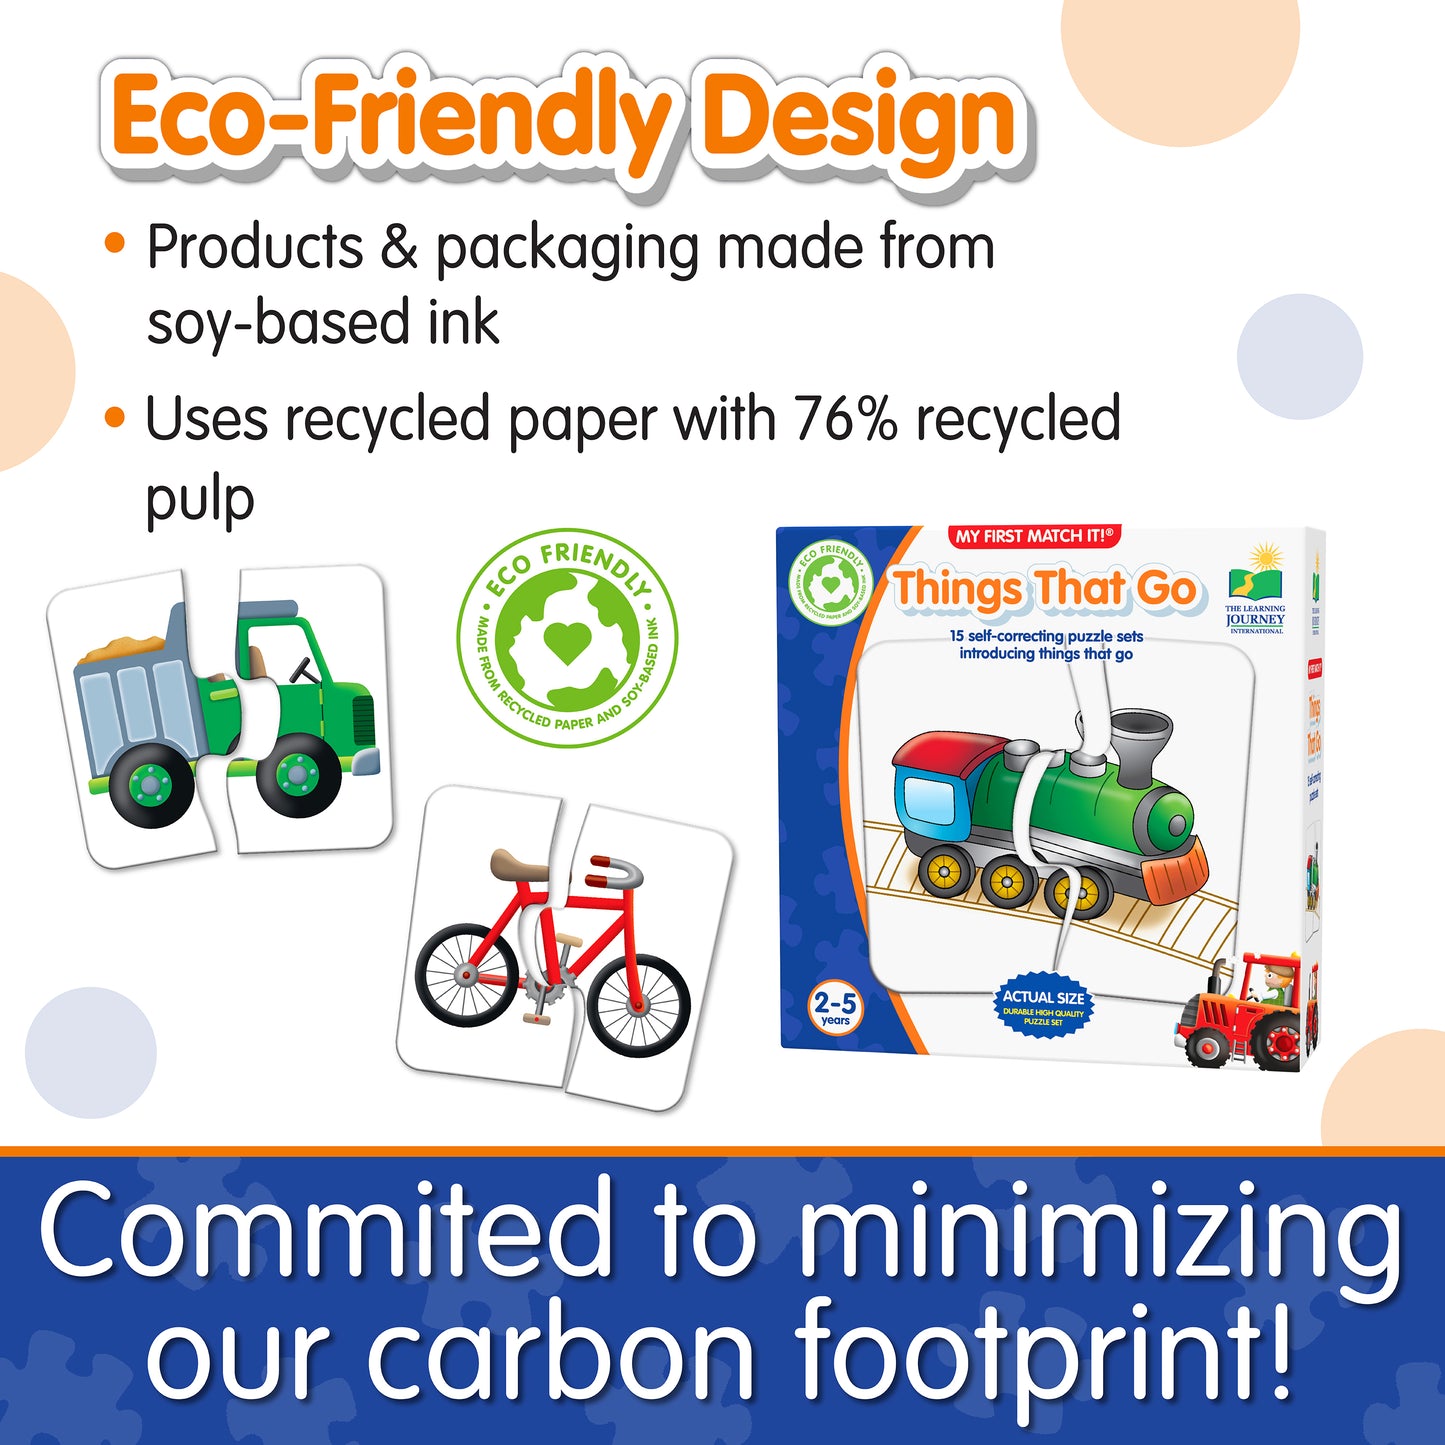 Infographic about My First Match It - Things That Go's eco-friendly design that says, "Committed to minimizing our carbon footprint!"